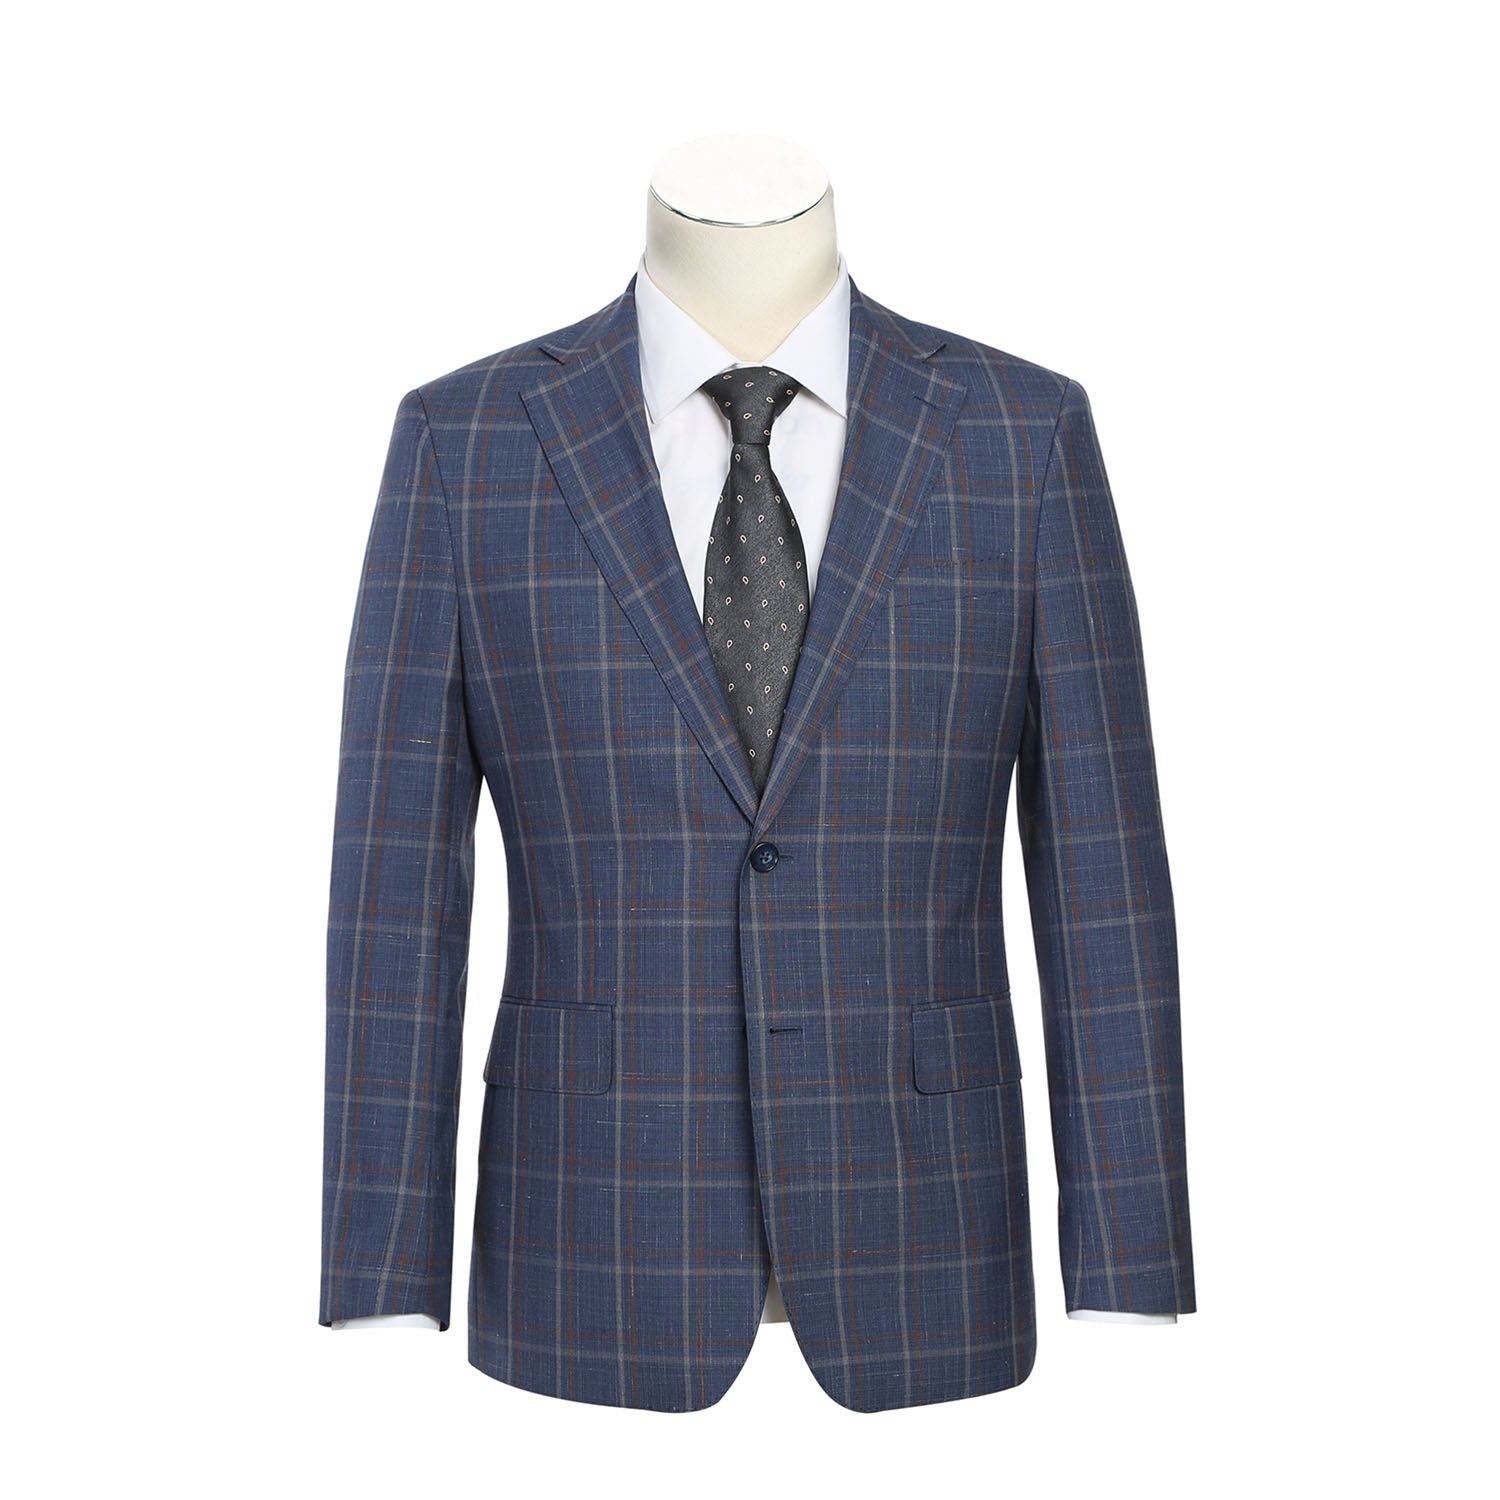 English Laundry Light Steel Blue with Orange Check Wool Suit